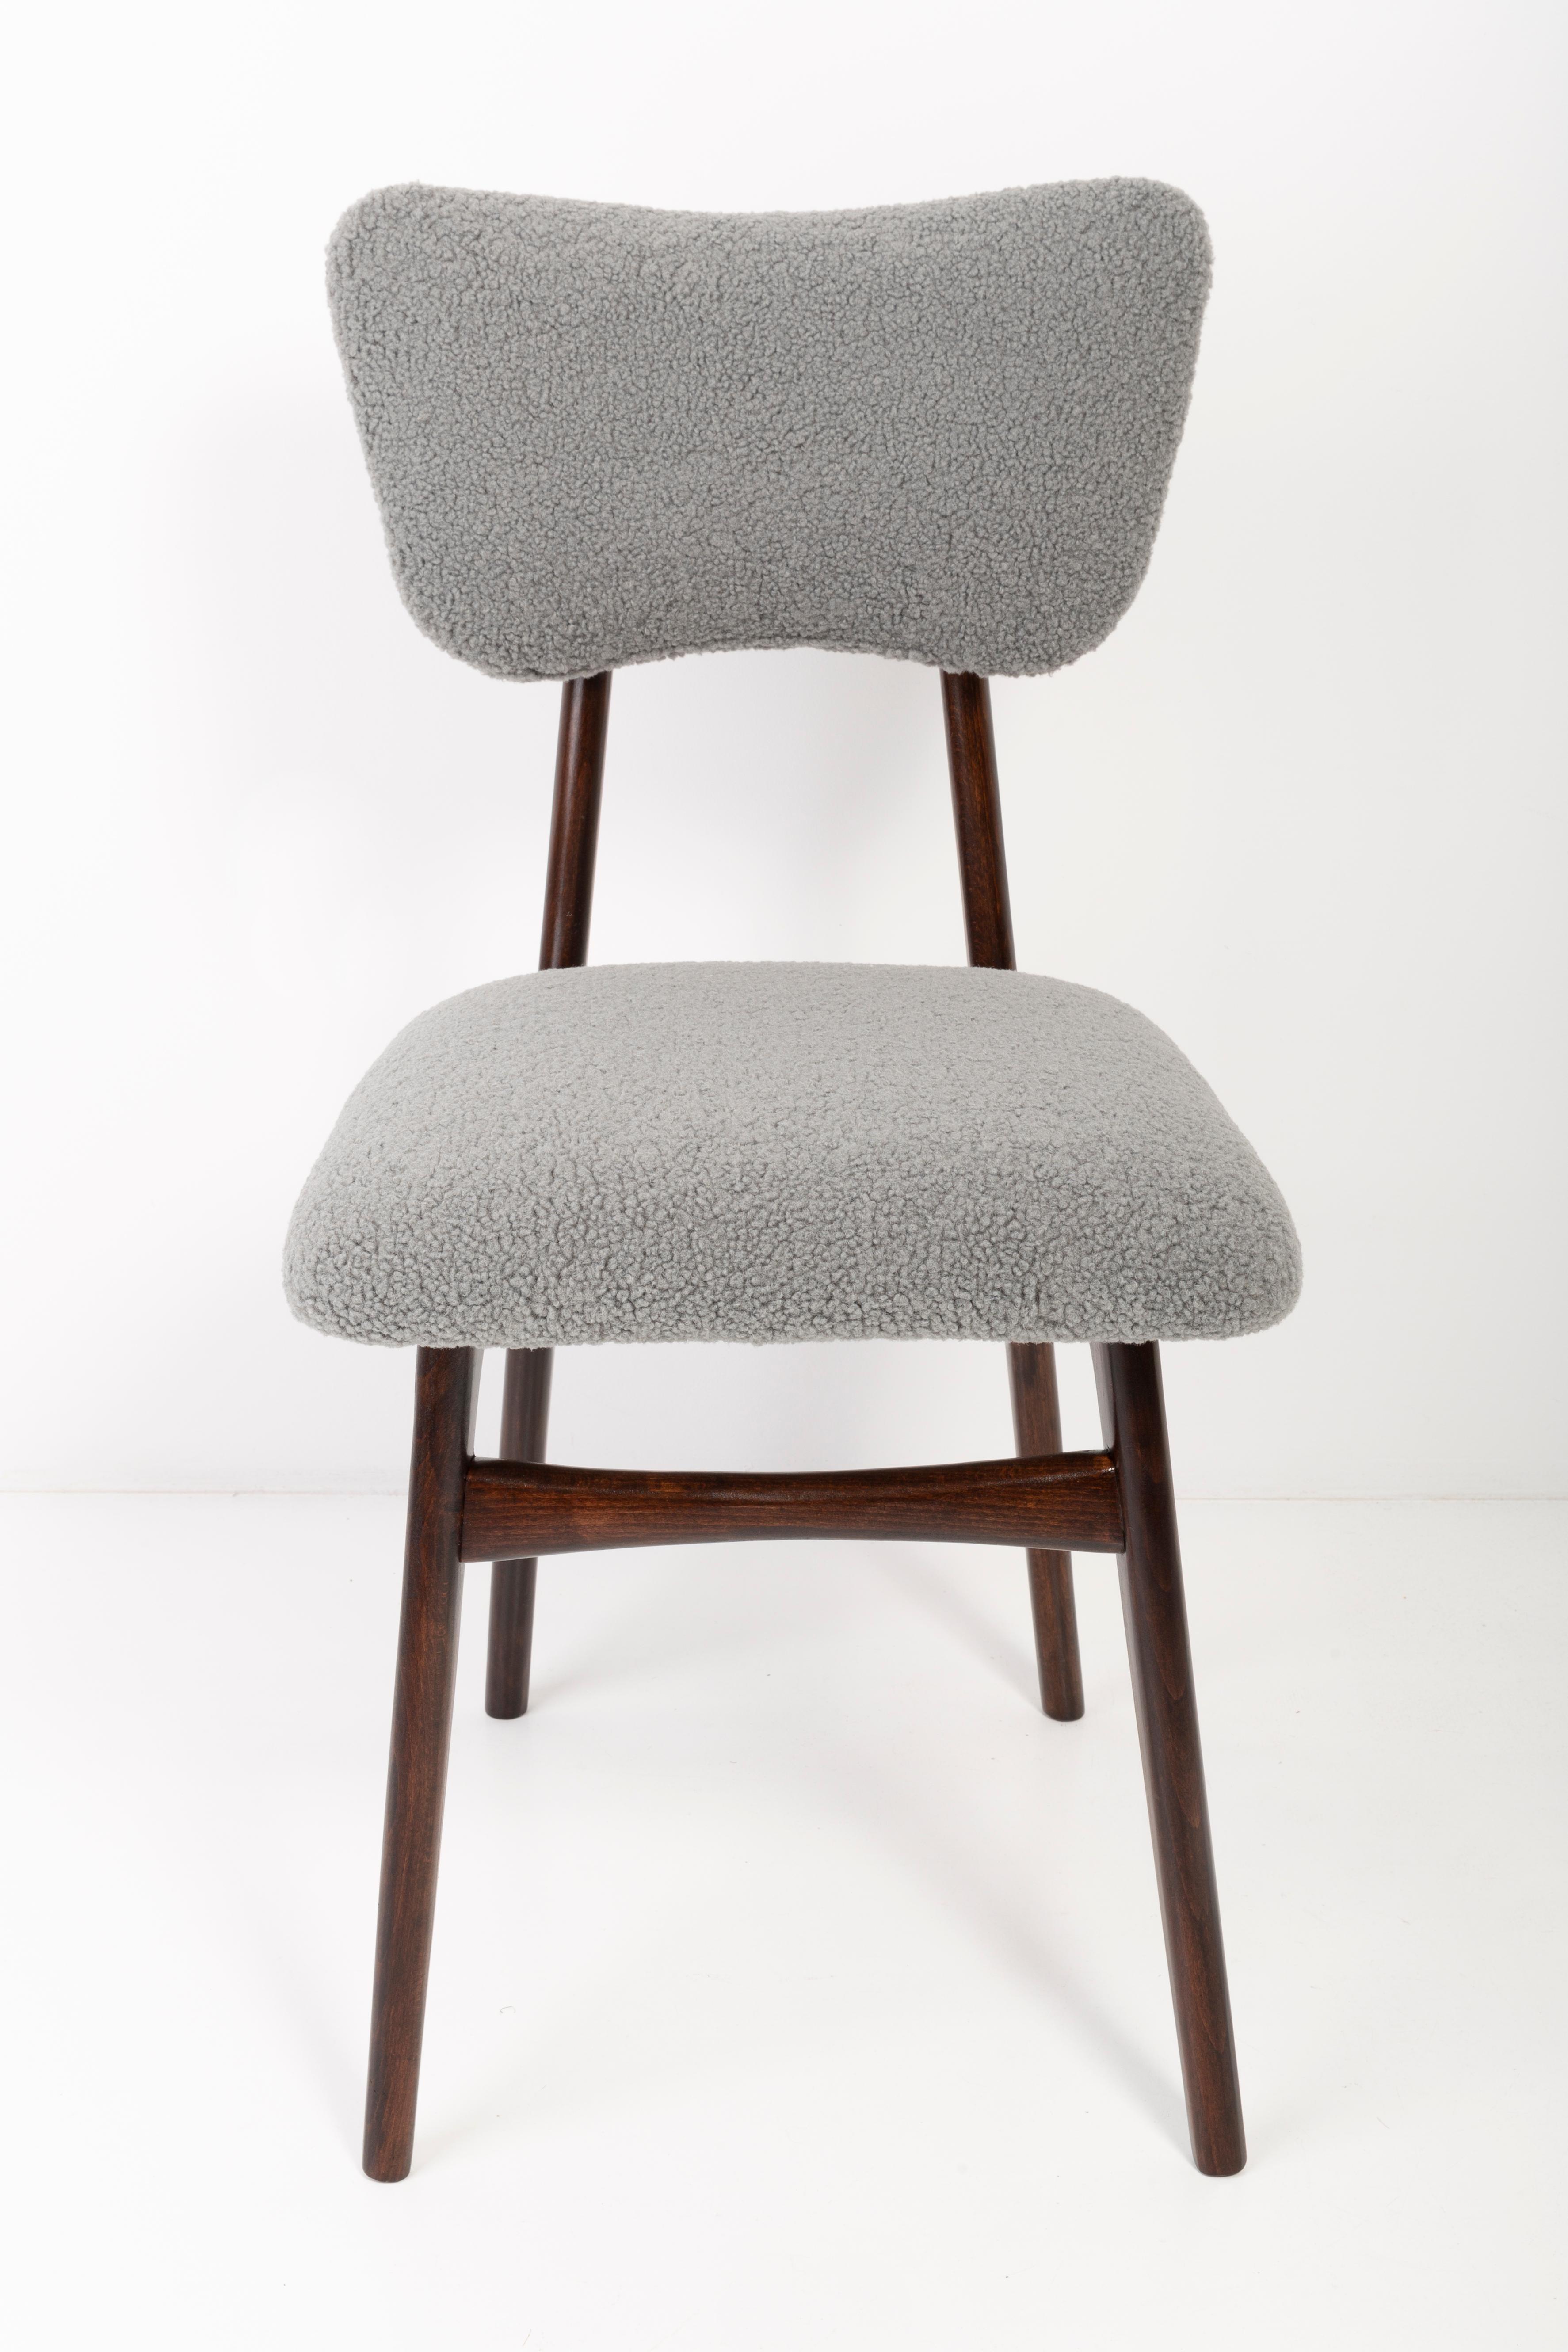 Set of Eight 20th Century Gray Boucle Chairs, 1960s For Sale 5